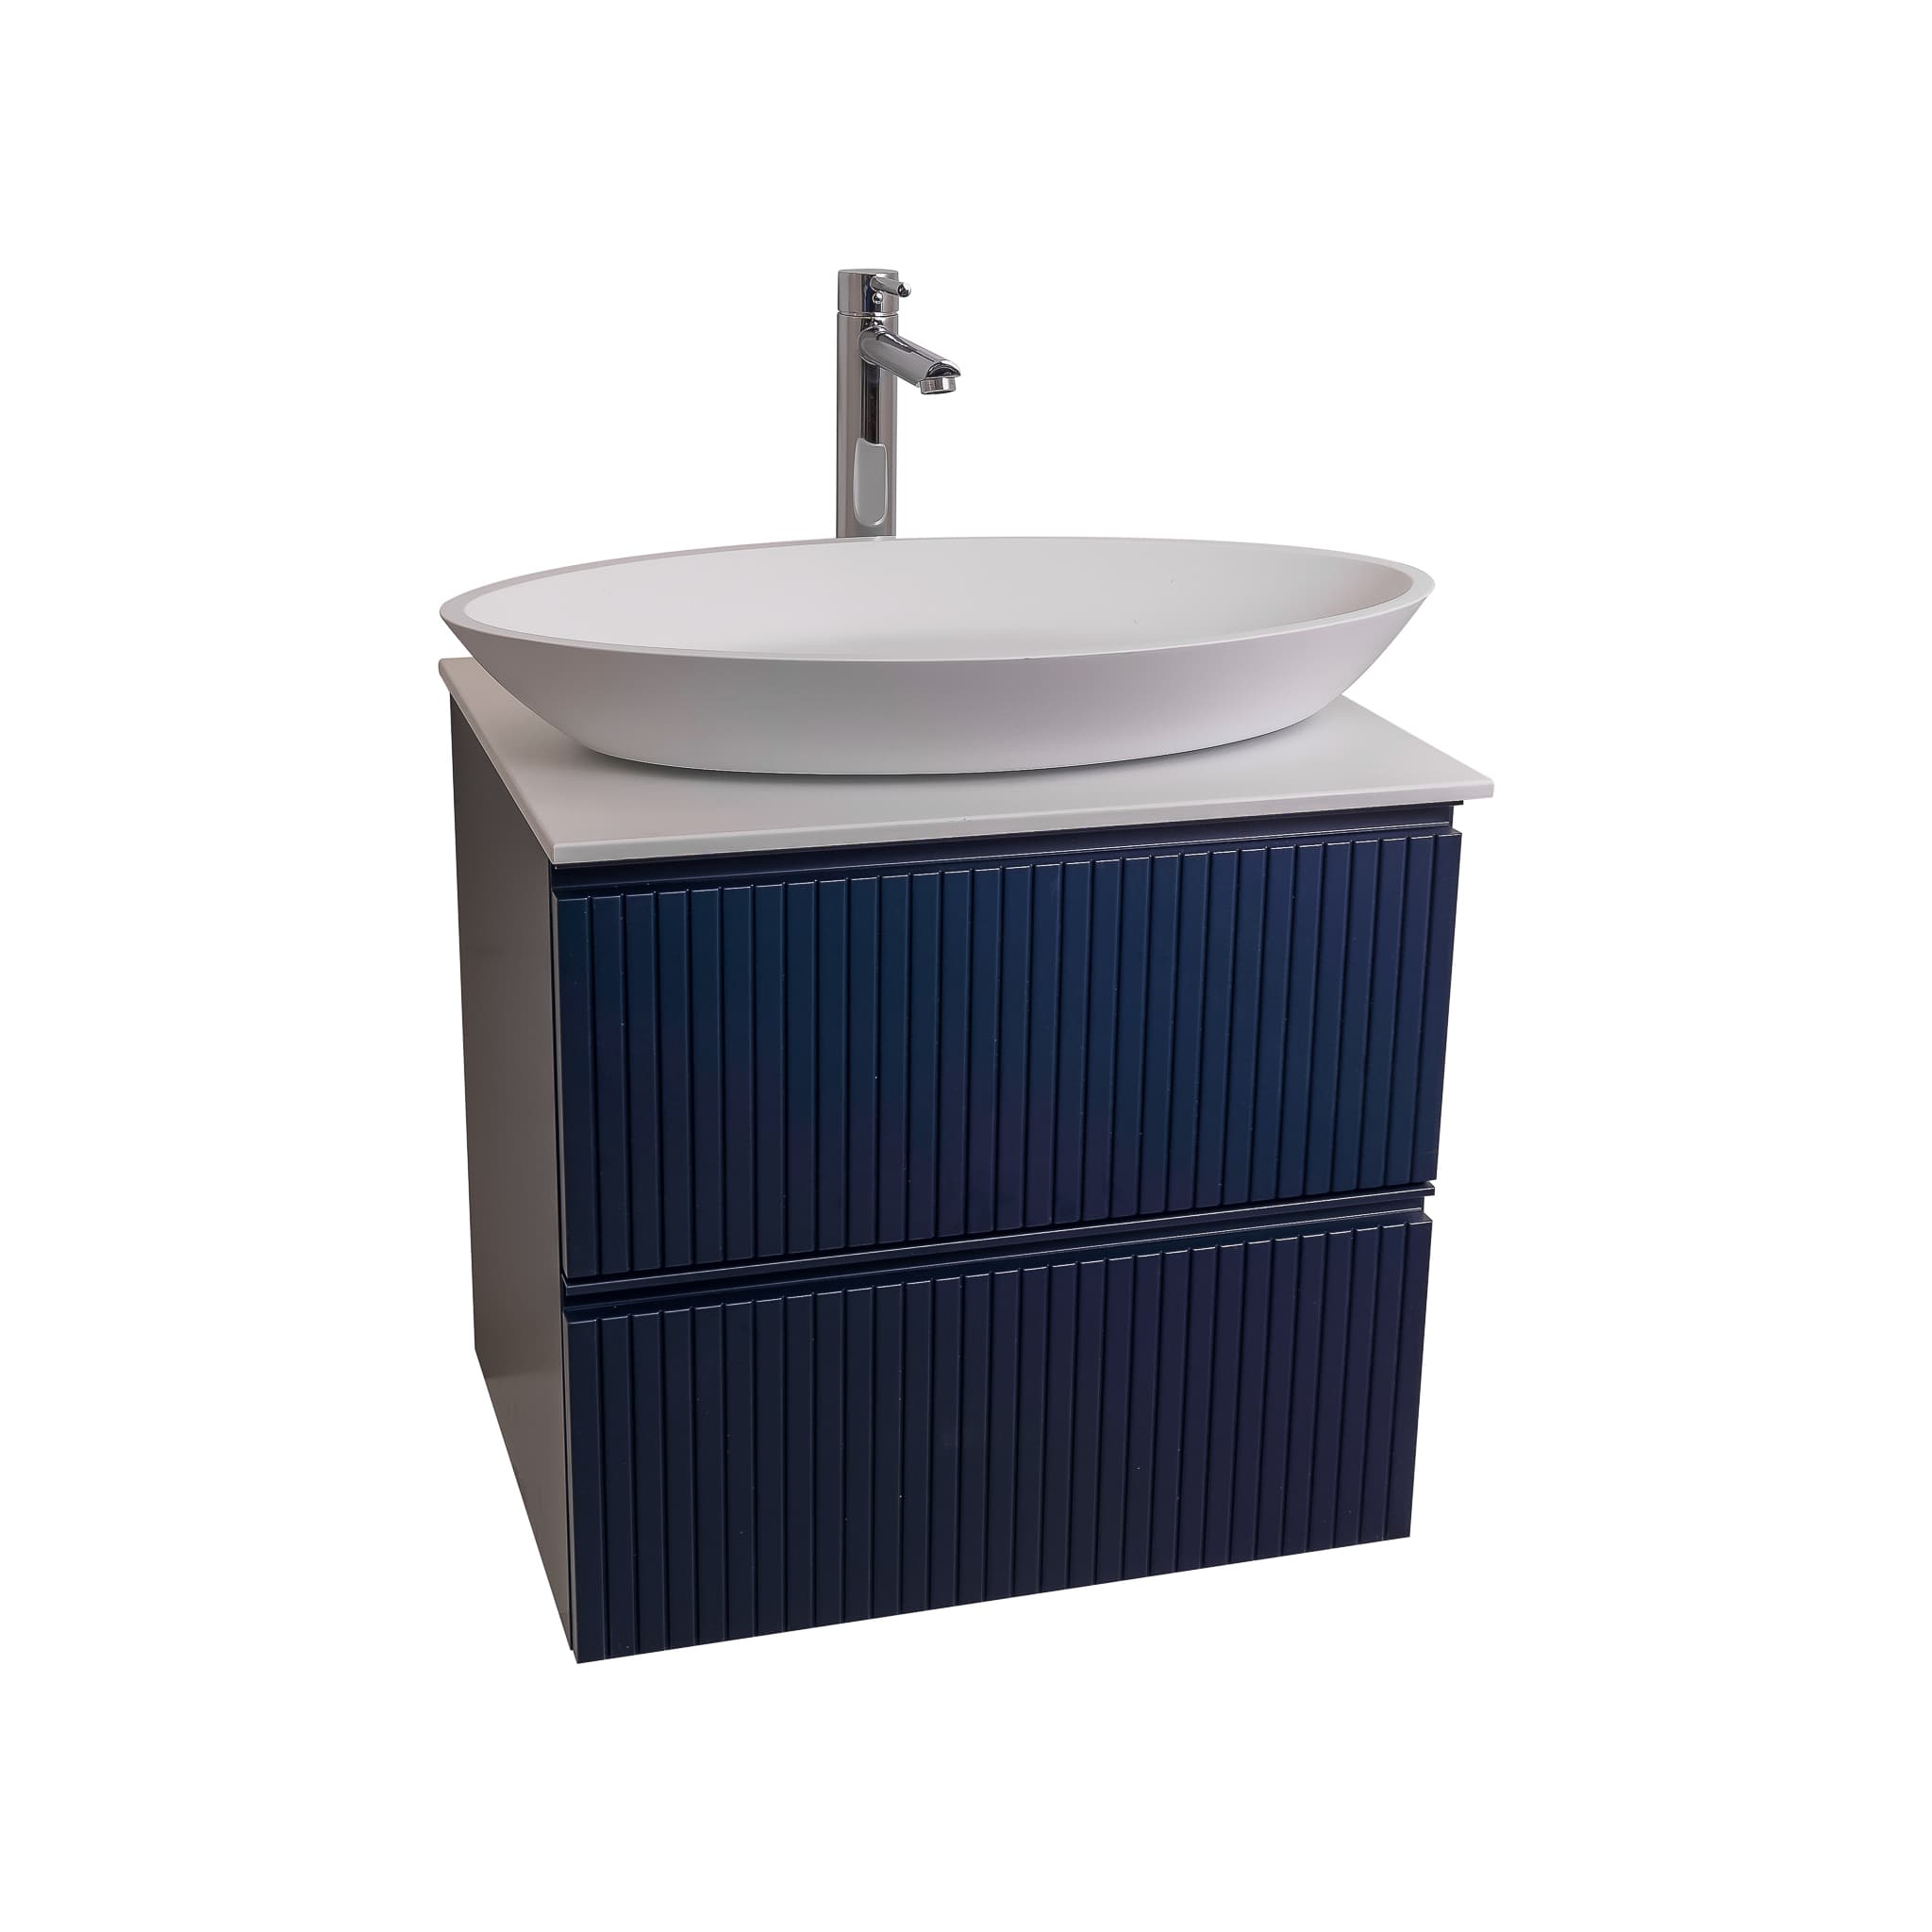 Ares 23.5 Matte Navy Blue Cabinet, Solid Surface Flat White Counter And Oval Solid Surface White Basin 1305, Wall Mounted Modern Vanity Set